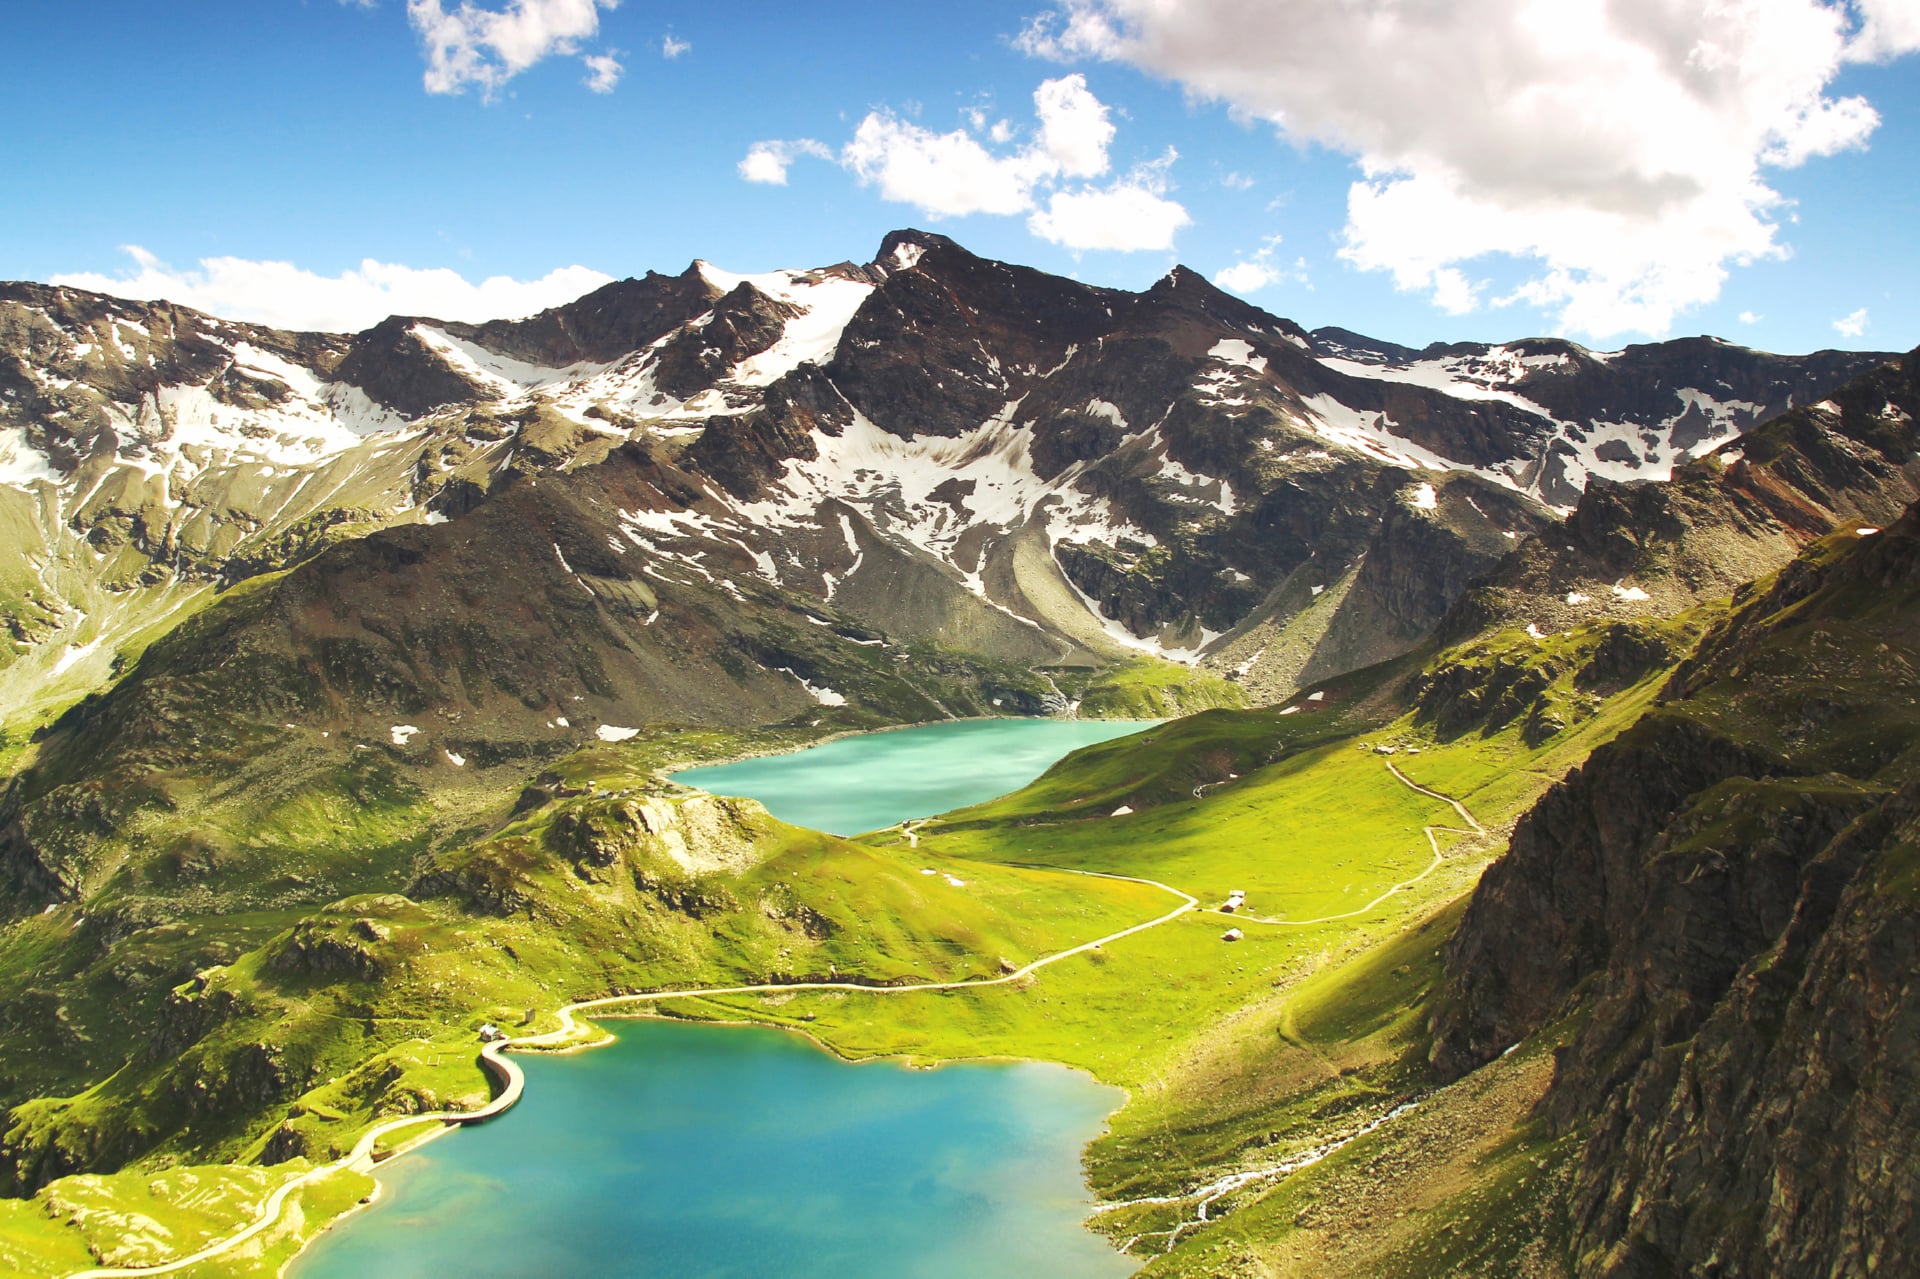 Ceresole Reale wallpapers HD quality